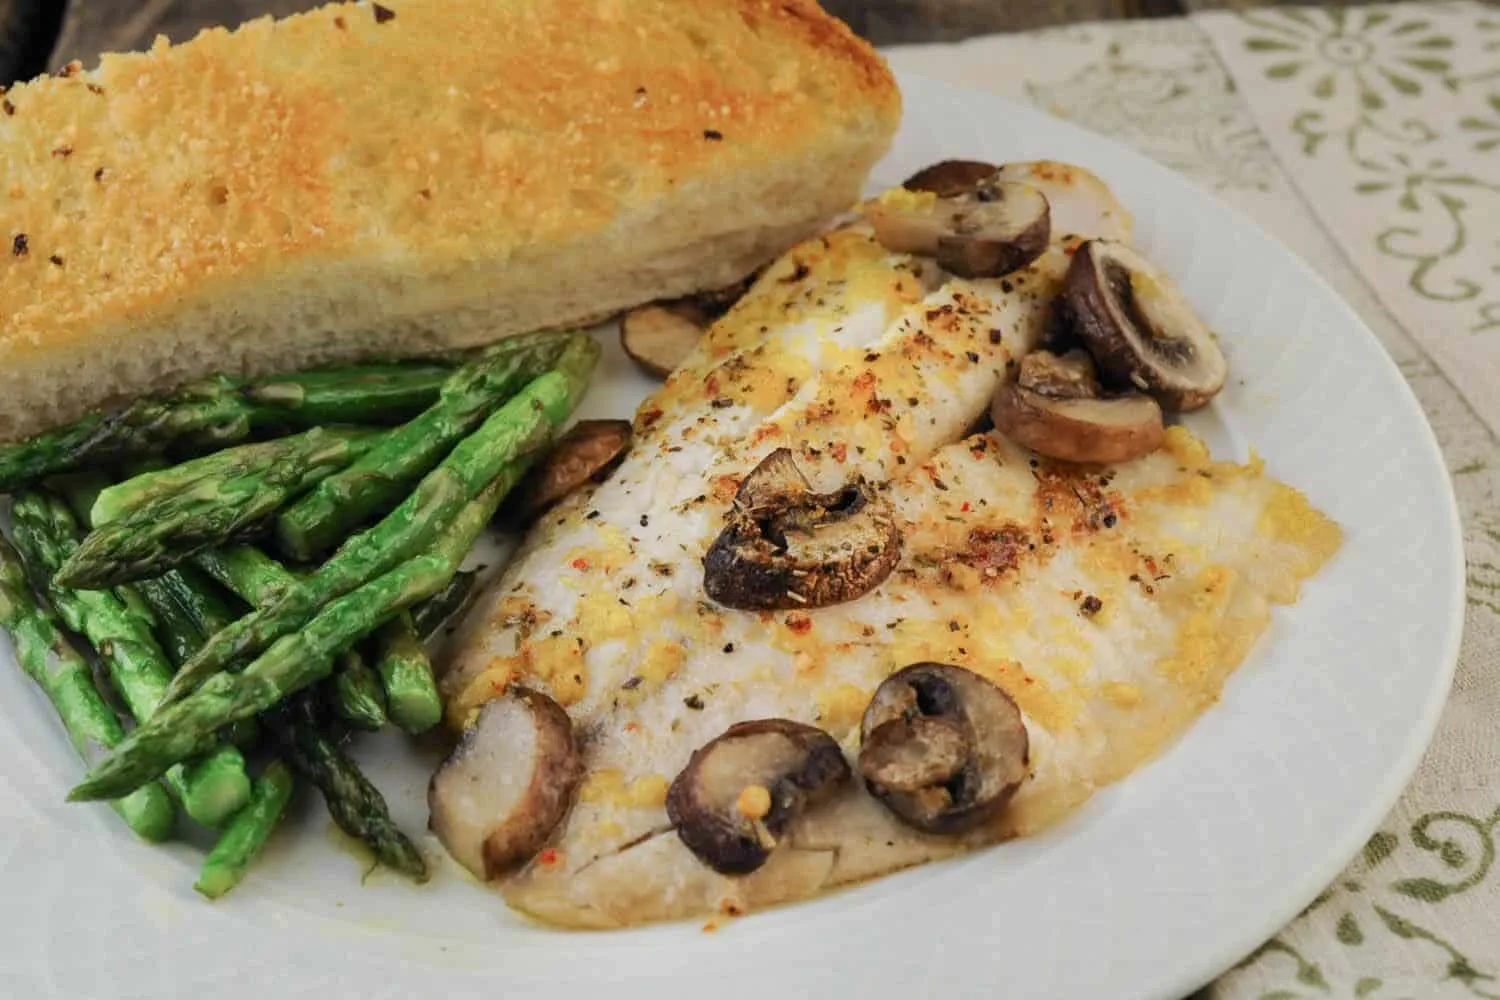 Baked Fish with Mushrooms and Italian Herbs